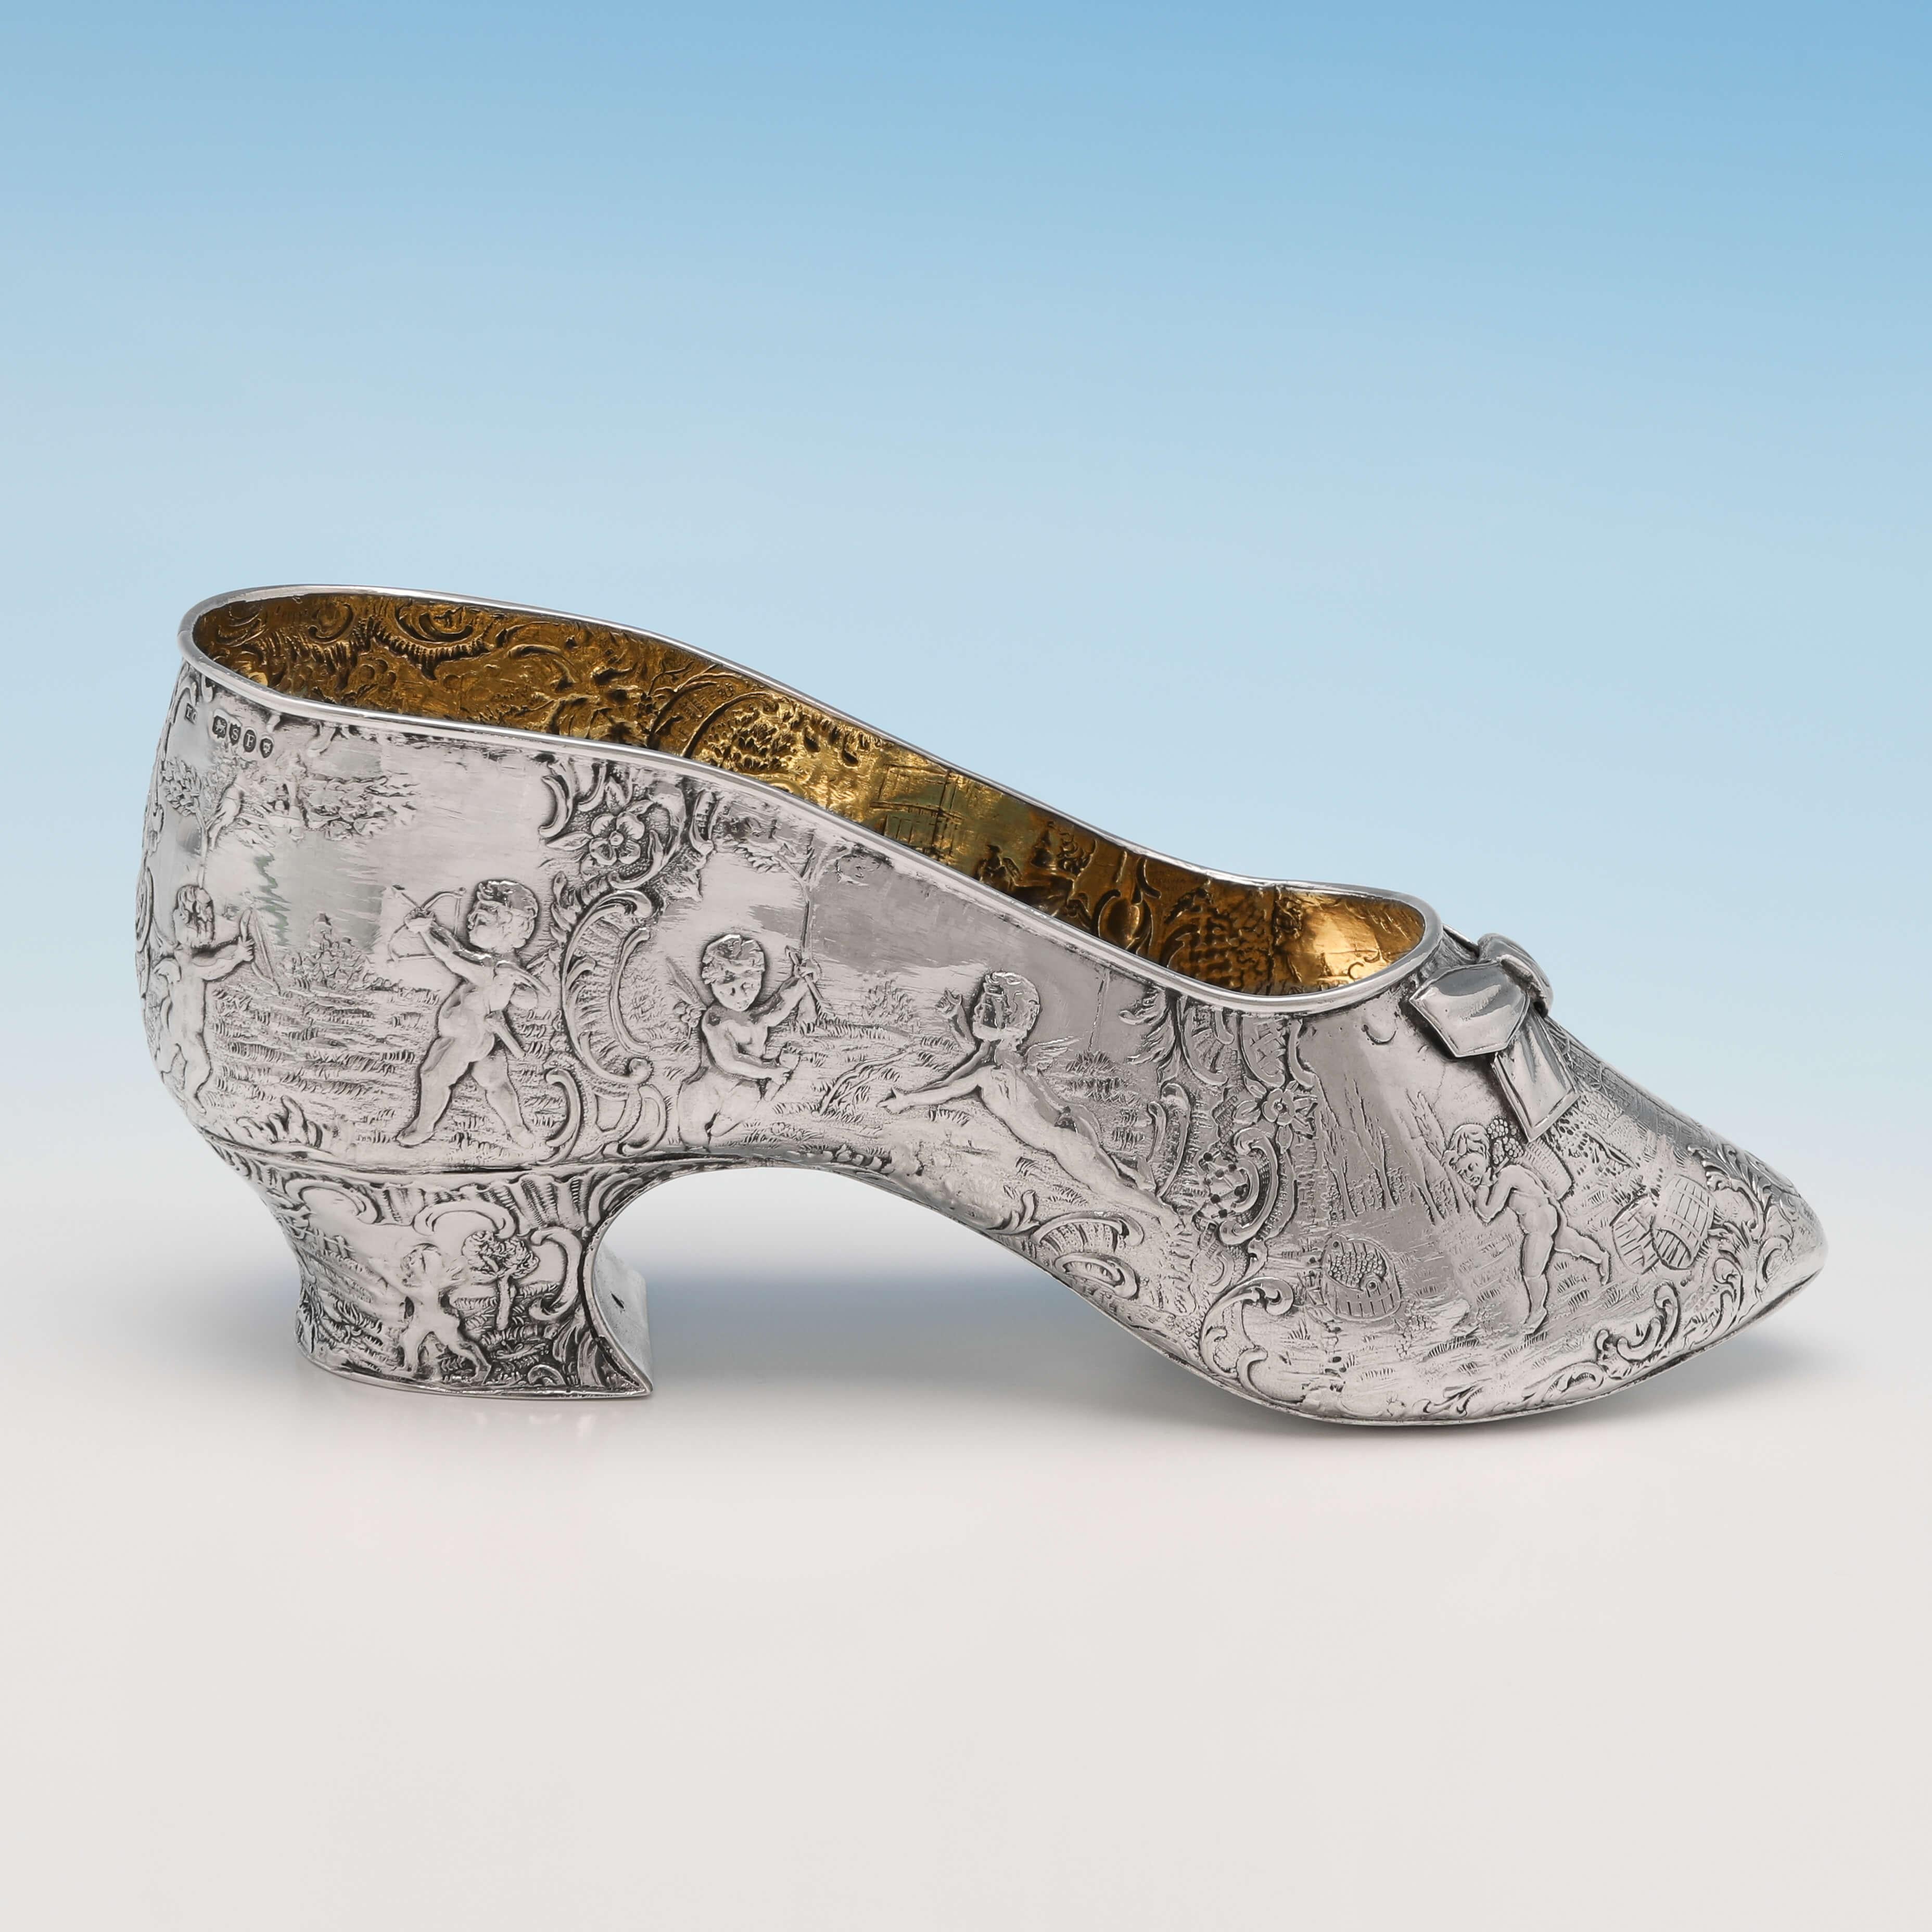 Import marked for London in 1893 by Thomas Glaser, this attractive, Antique Sterling Silver Model of a Shoe, features chased decoration throughout, and a gilt interior. The show model measures 2.75